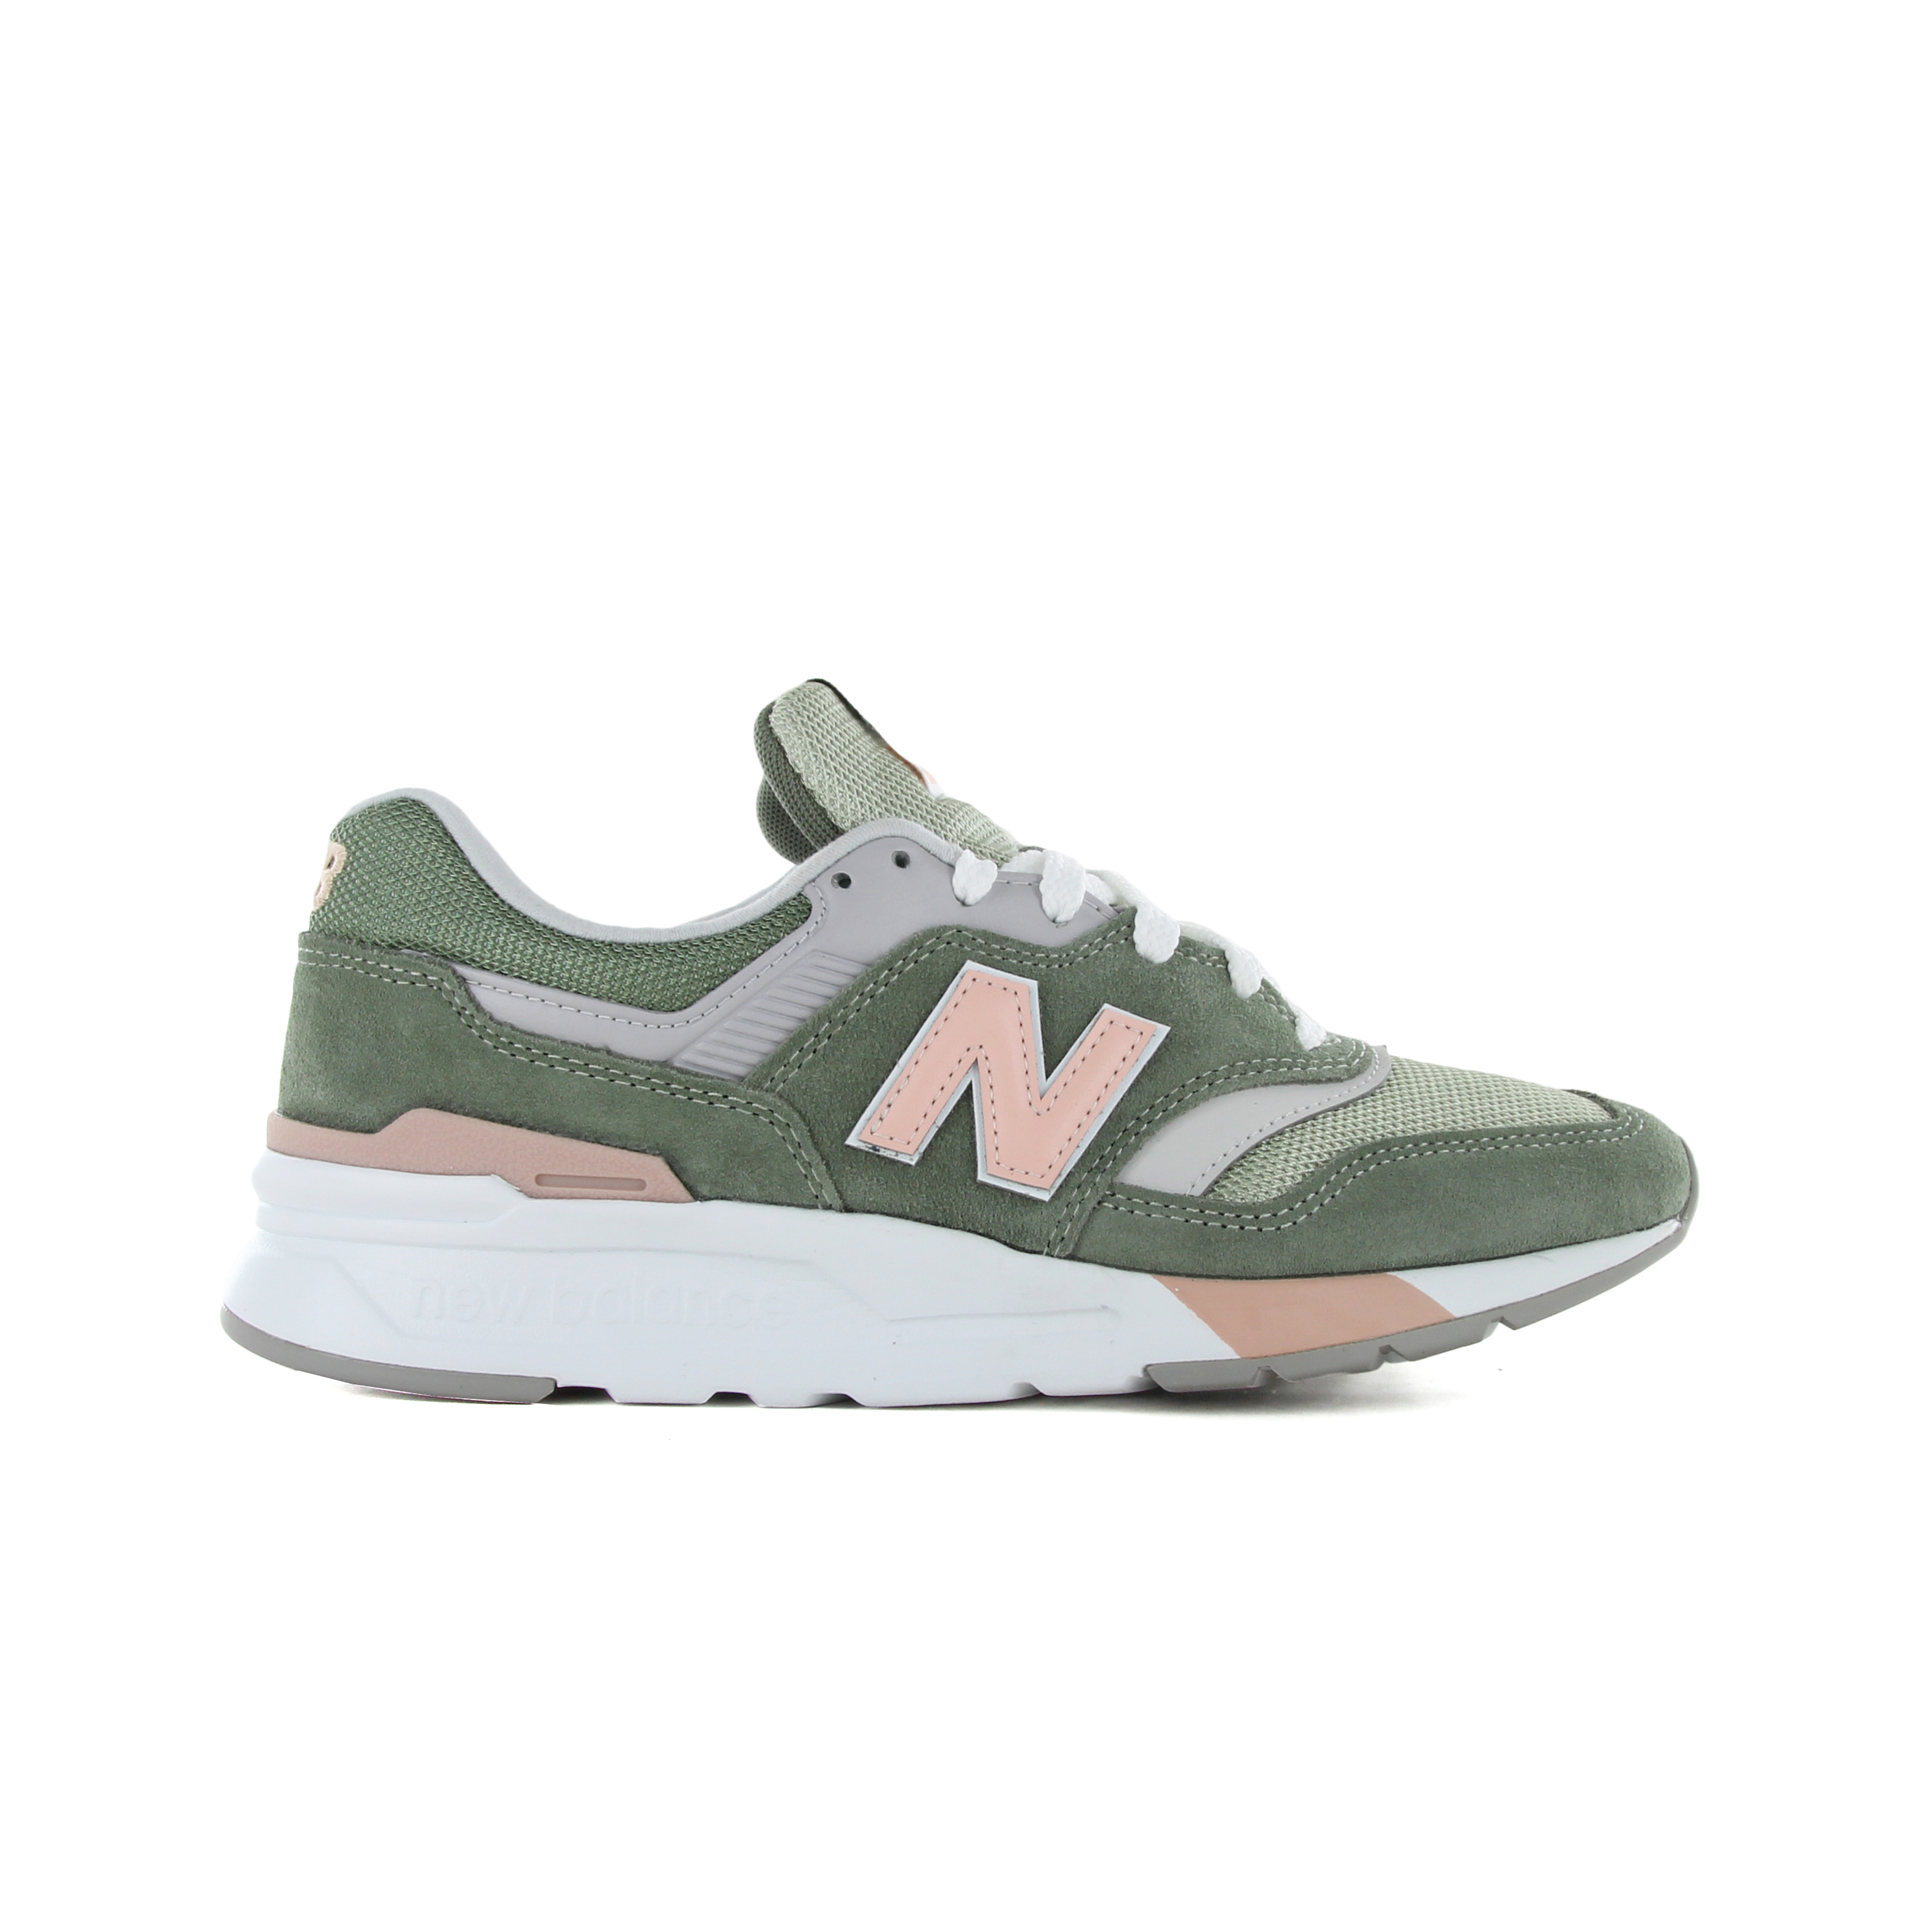 New Balance Zapatillas Mujer CW997HVC lateral exterior